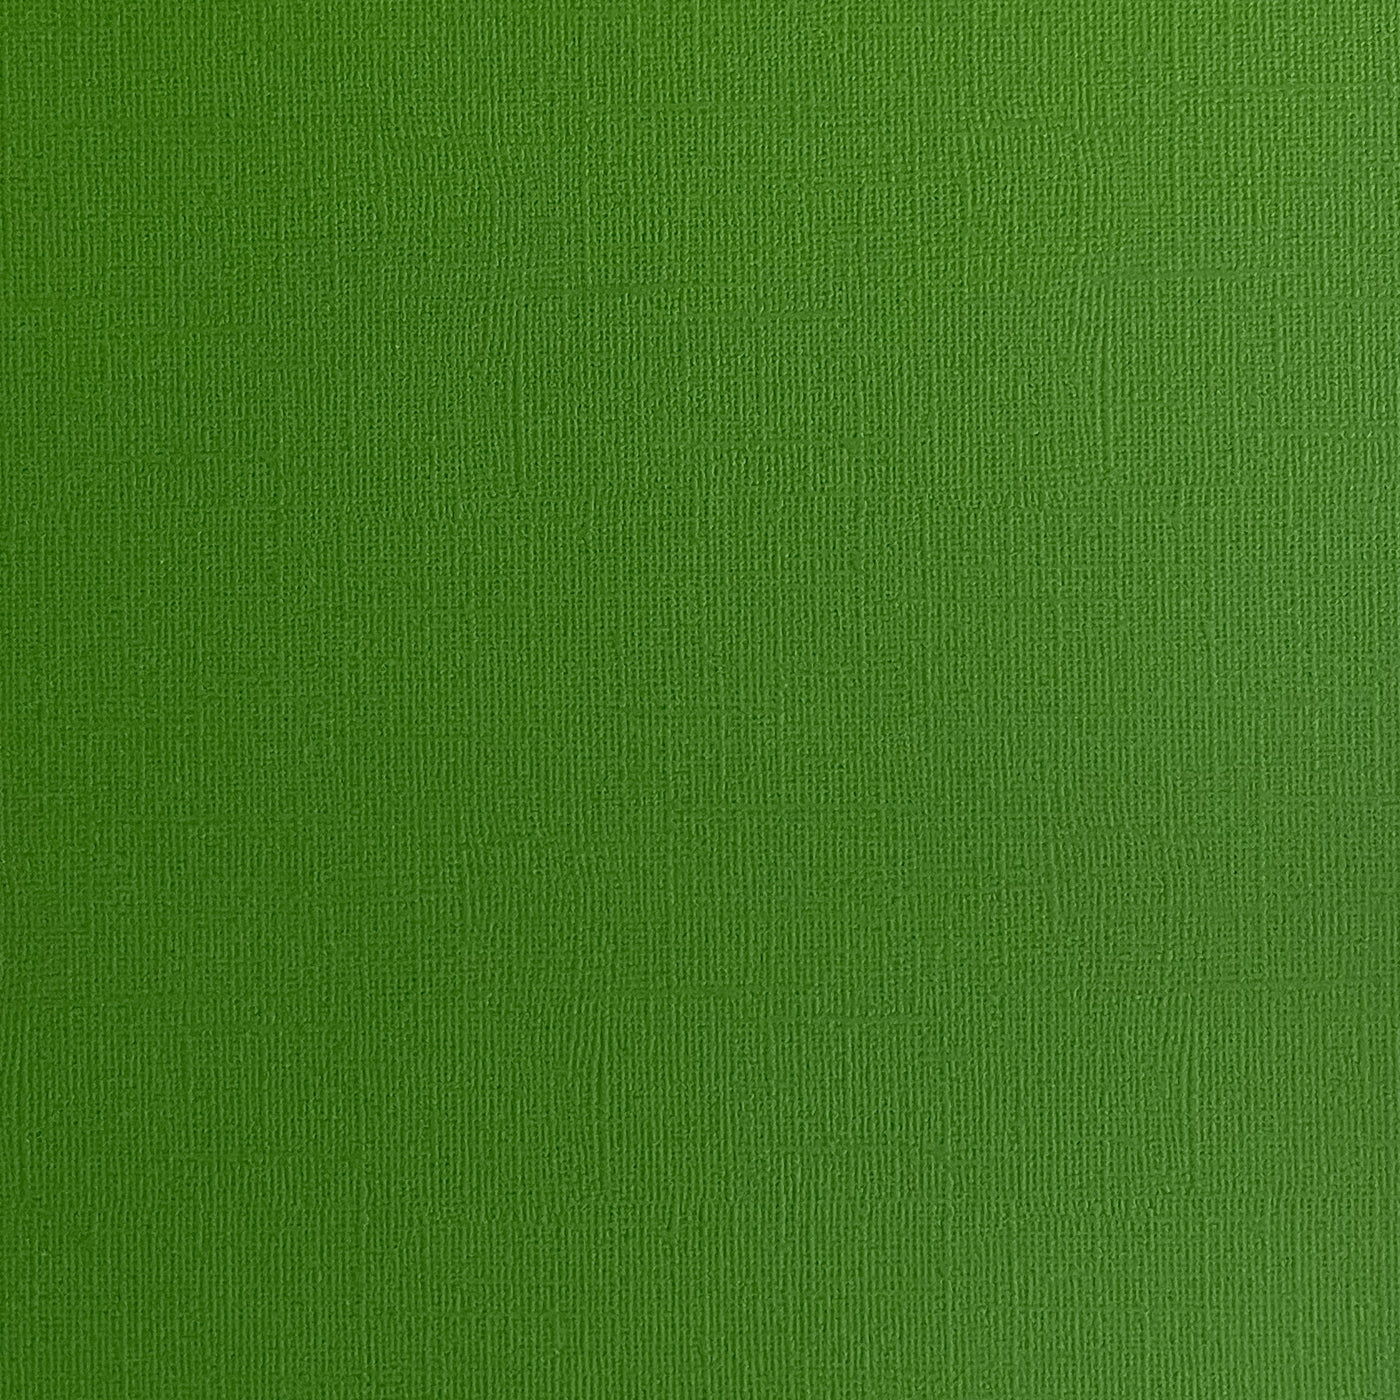 DILL PICKLE - Green Textured 12x12 Cardstock - Encore Paper